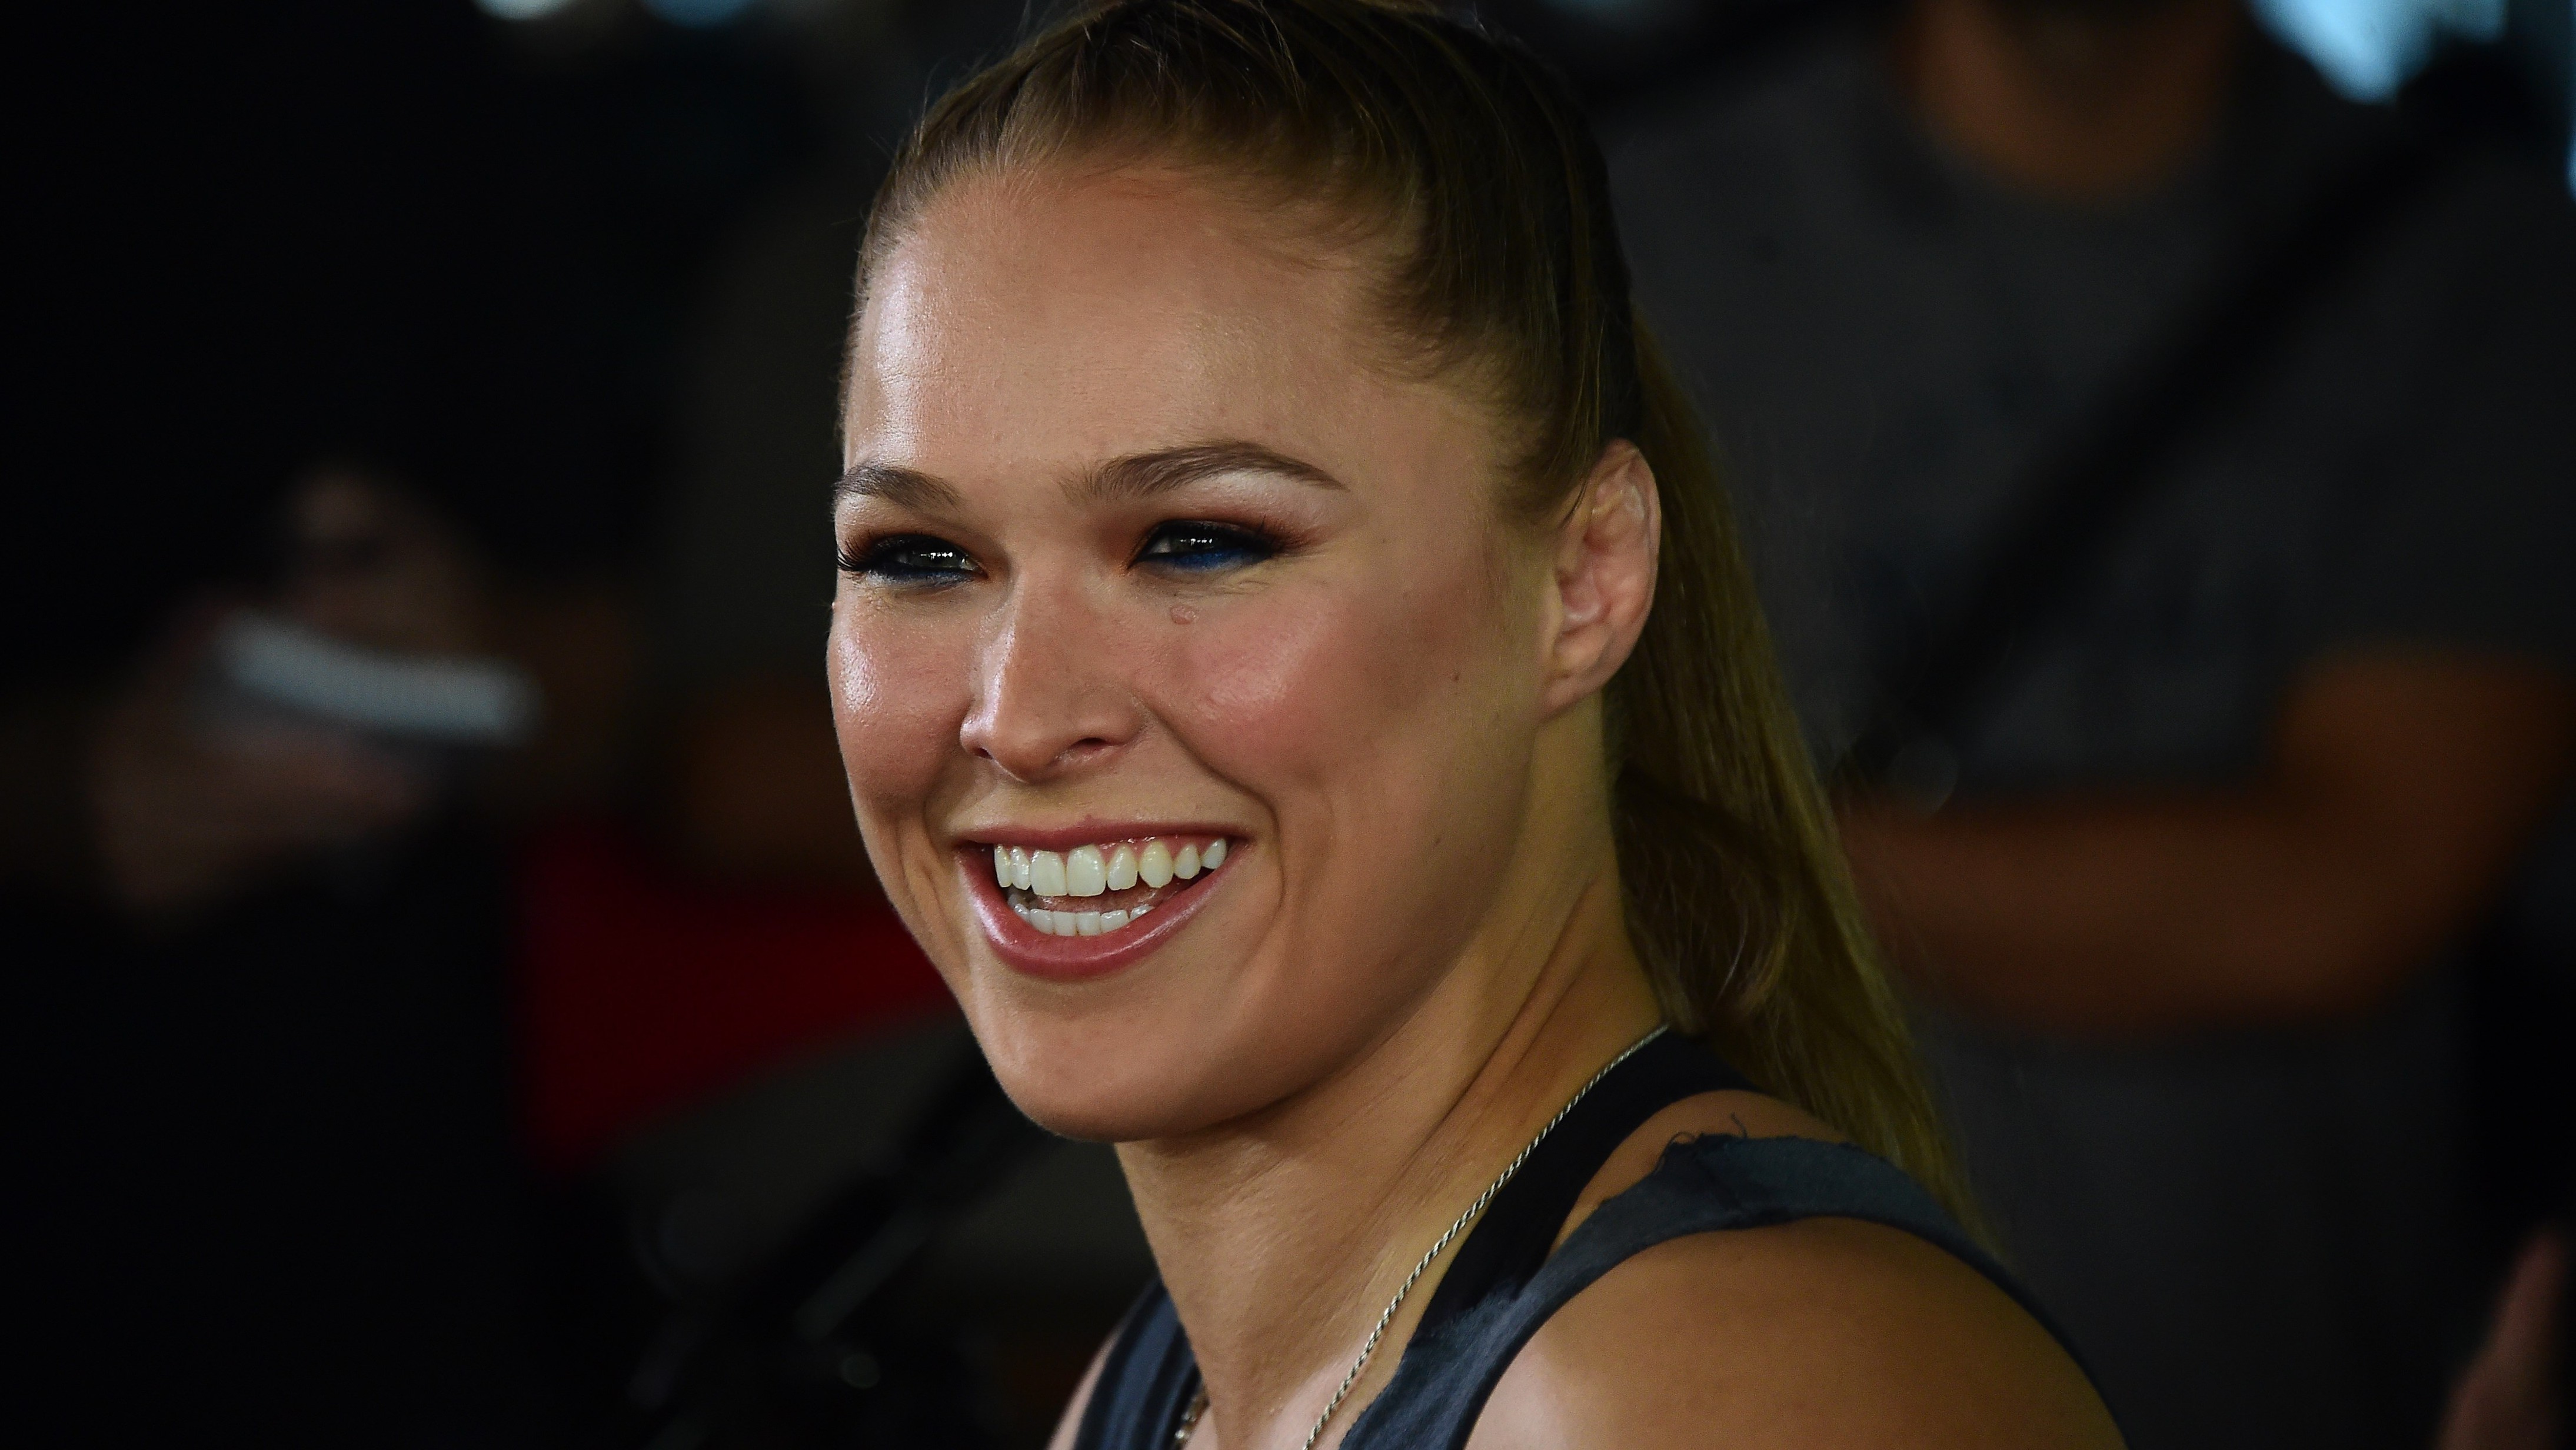 Ronda Rousey Net Worth 5 Fast Facts You Need to Know